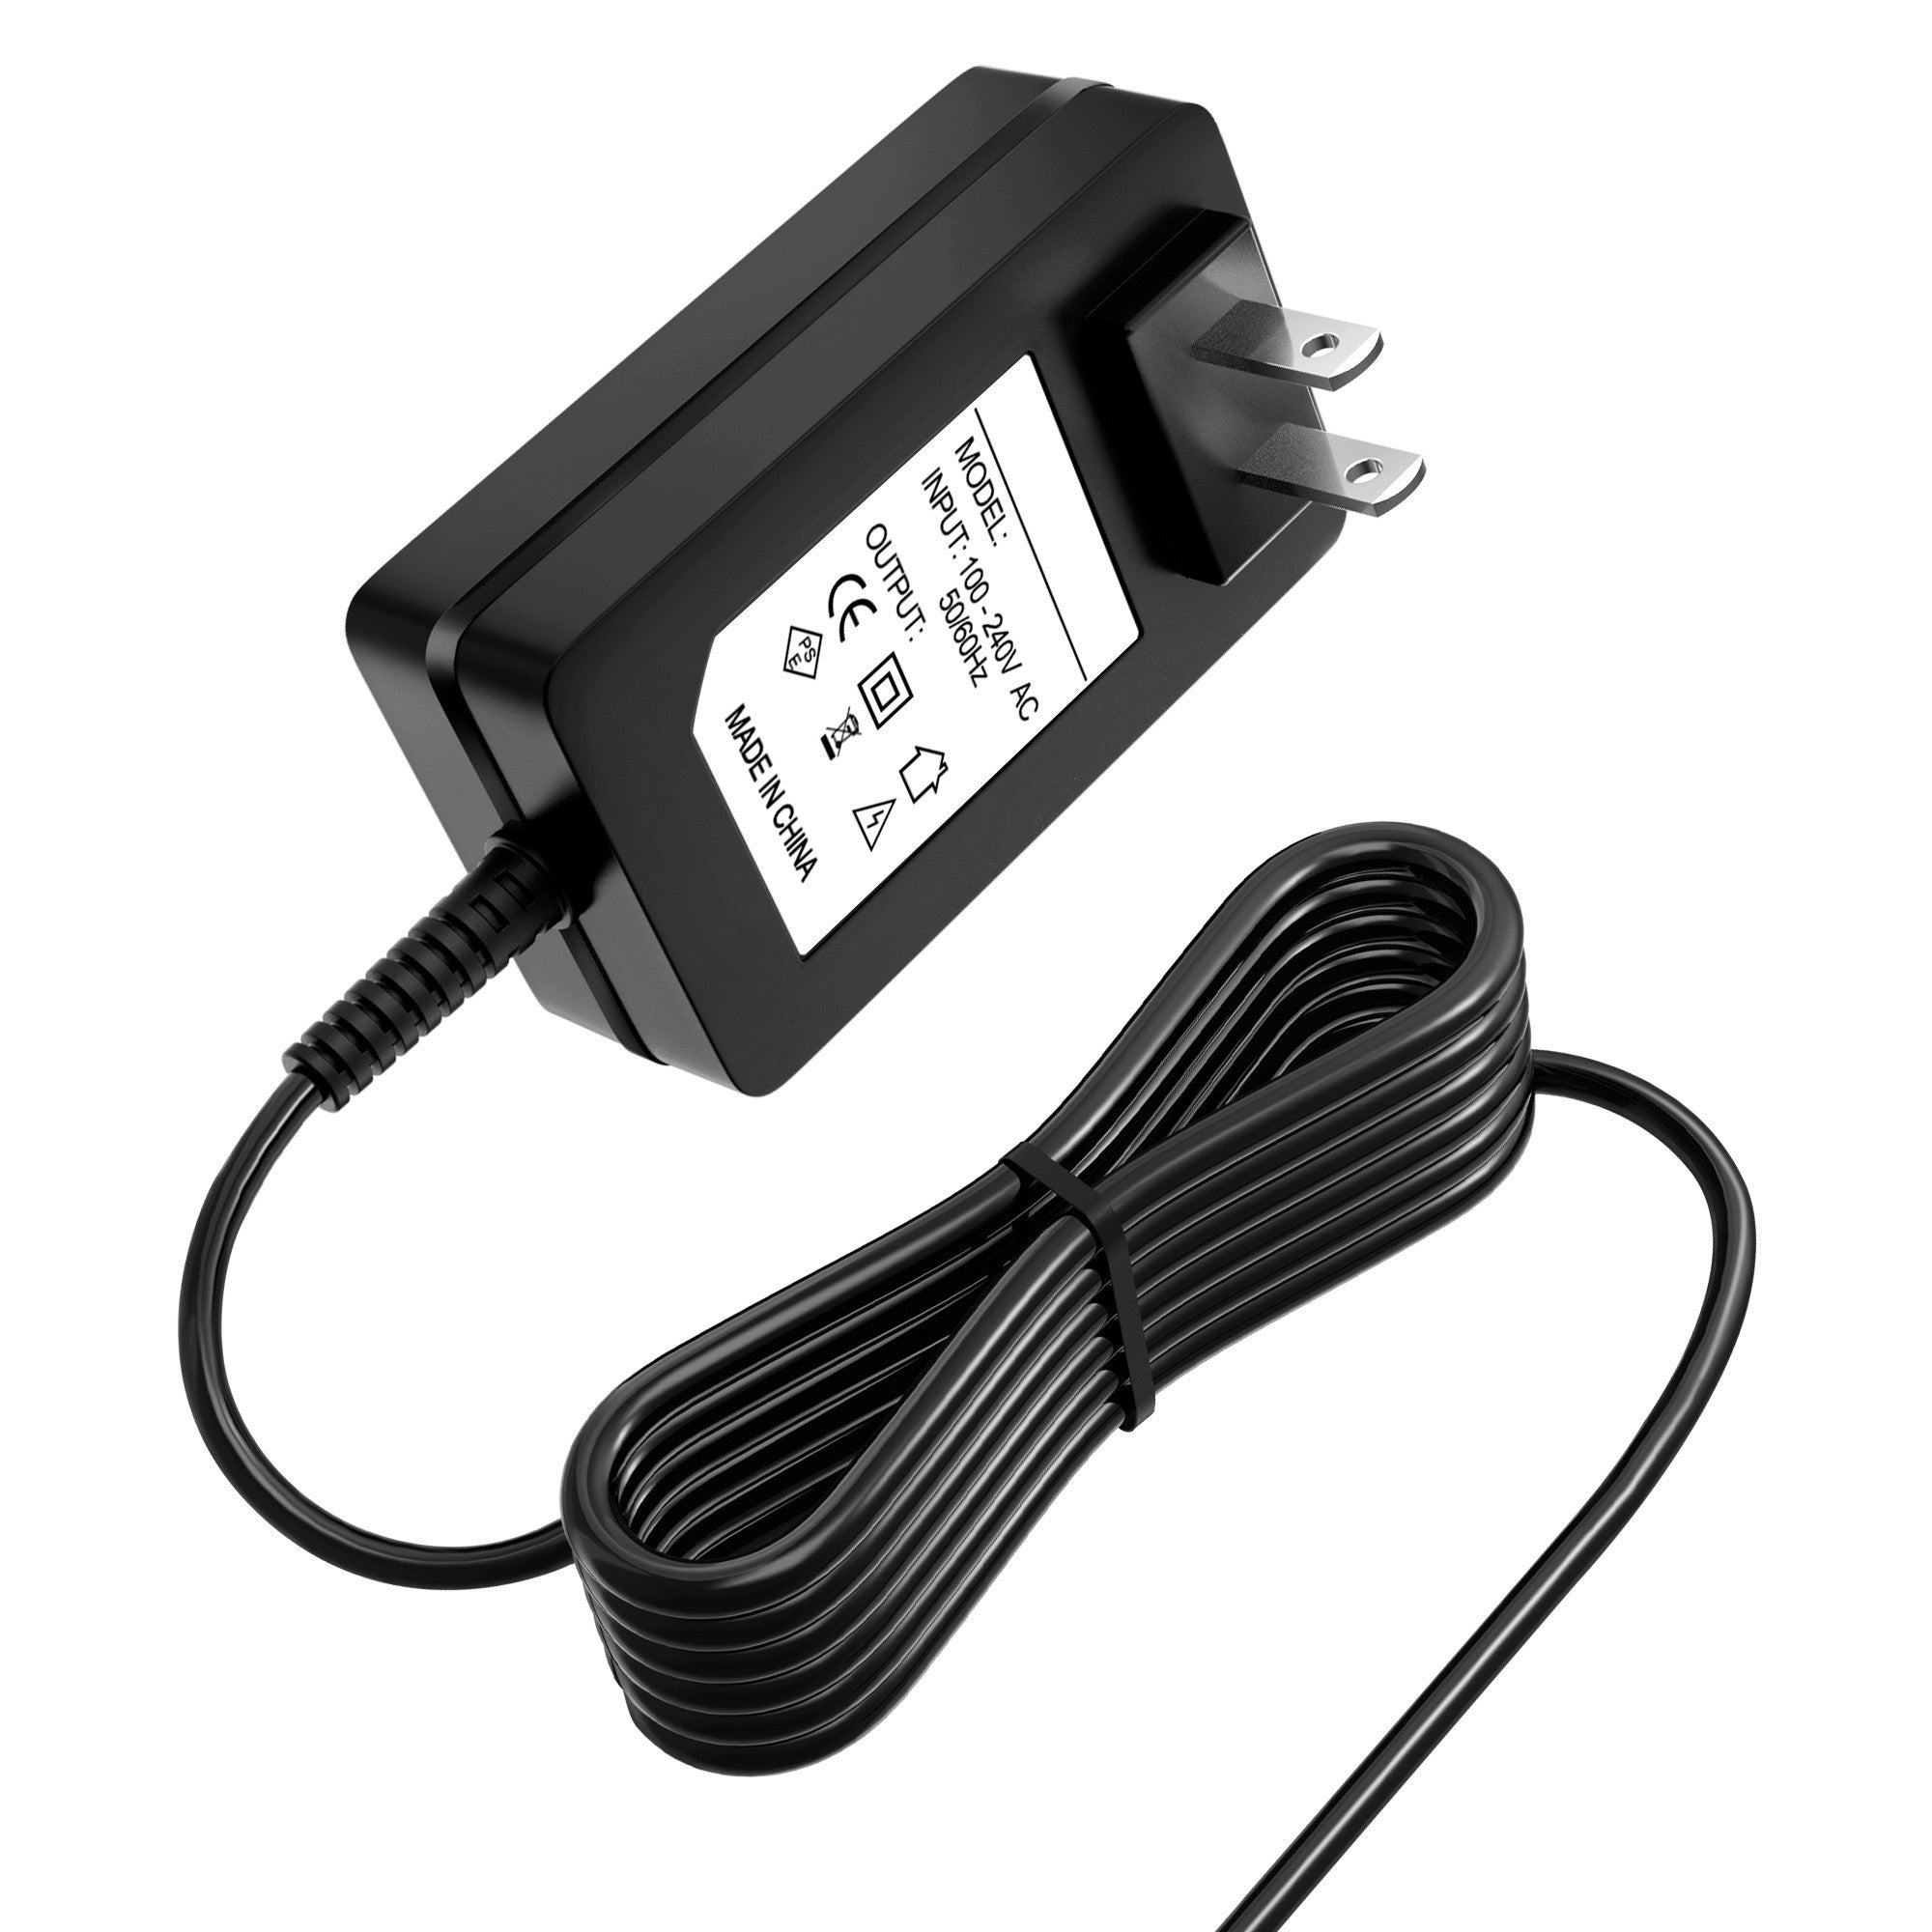 AbleGrid 13V 4A Adapter Compatible with Roland AC-33 Acoustic Guitar Amp psb12u psb-12u Power Supply